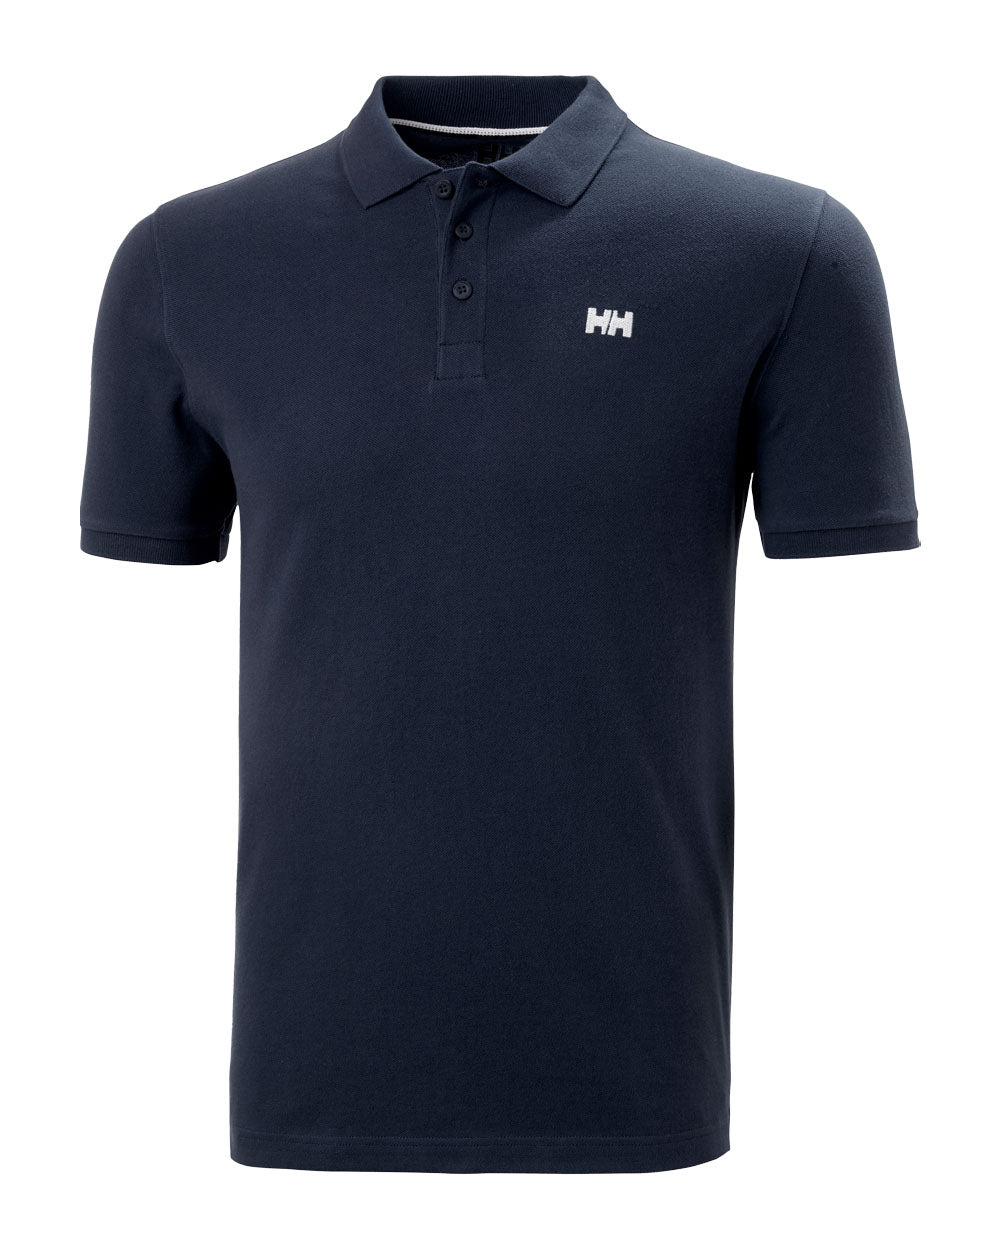 Navy coloured Helly Hansen Polo Shirt on White background 